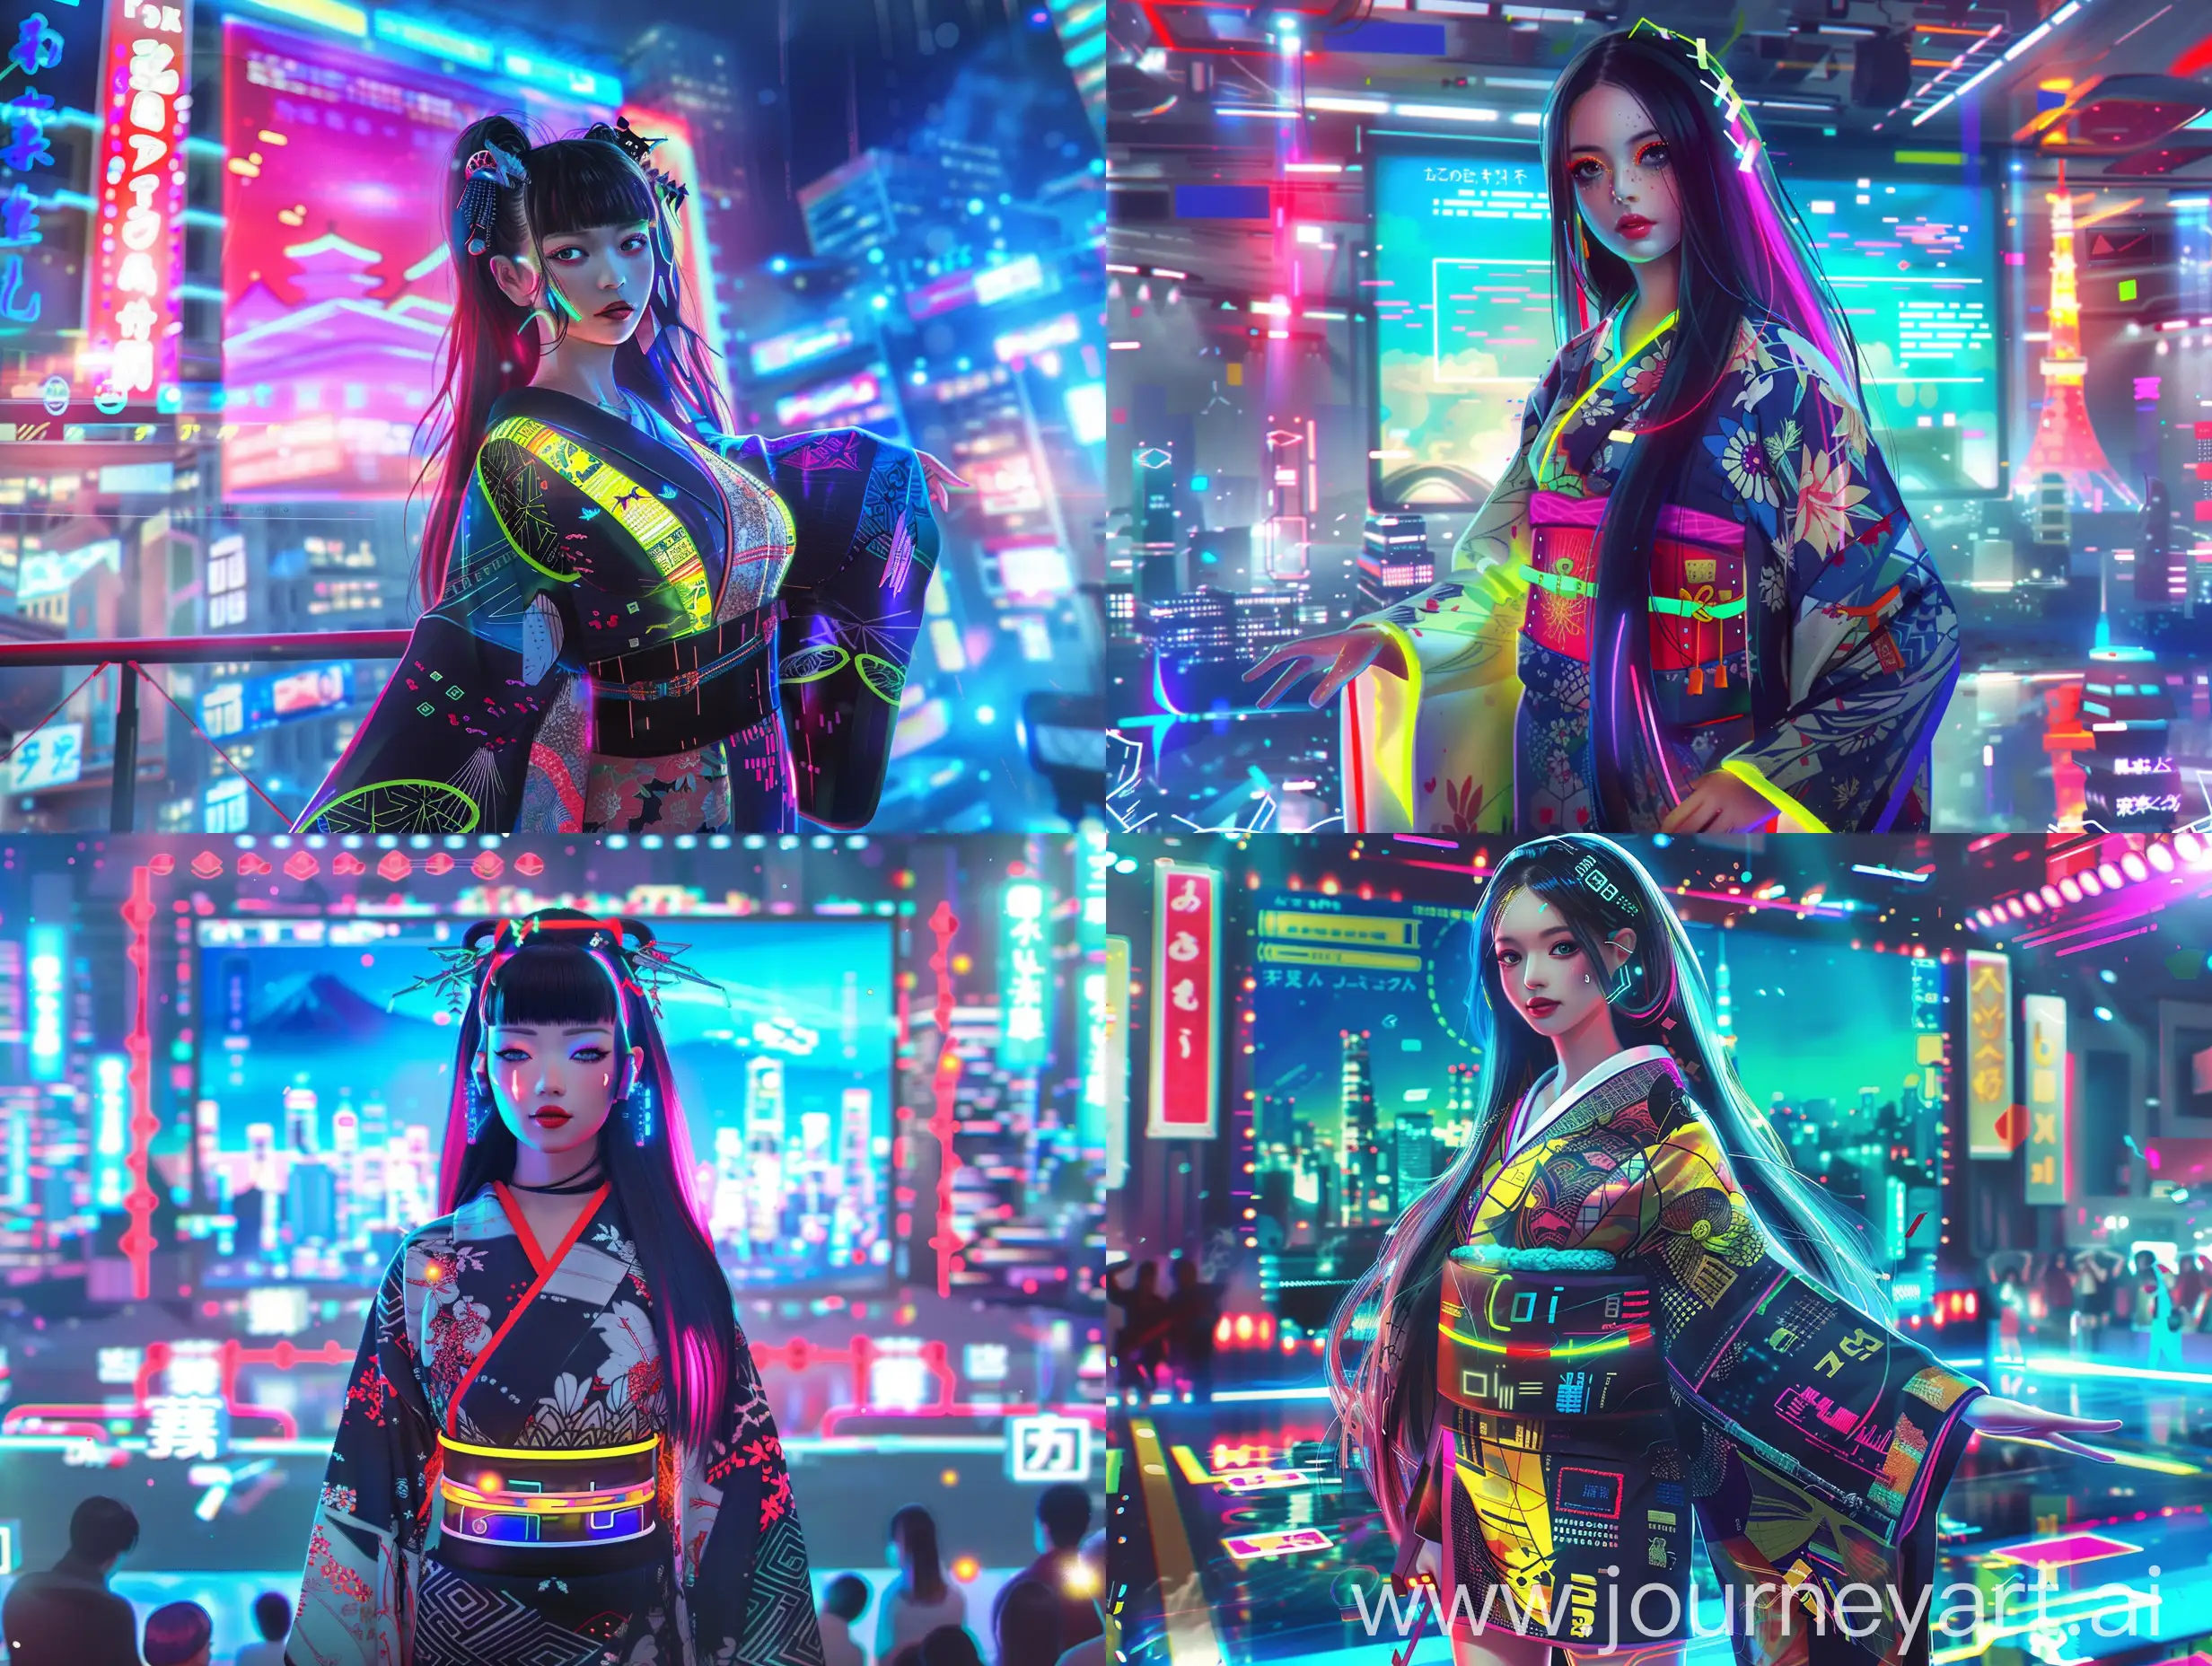 Create an image of a near-future Japanese idol. The idol is a young woman in her early twenties with a stylish and futuristic appearance. She has long, sleek, dark hair with subtle neon highlights that change color. Her outfit is a blend of traditional Japanese fashion and advanced technology, featuring a modernized kimono with glowing patterns and integrated tech accessories. She stands confidently on a stage with a vibrant holographic backdrop, surrounded by futuristic cityscapes and advanced digital screens displaying her name and animated graphics. Her makeup is bold and accentuates her high-tech, chic look. The overall atmosphere is lively and energetic, with bright lights and a cheering crowd. The idol exudes a charismatic and innovative aura, symbolizing the fusion of tradition and future.